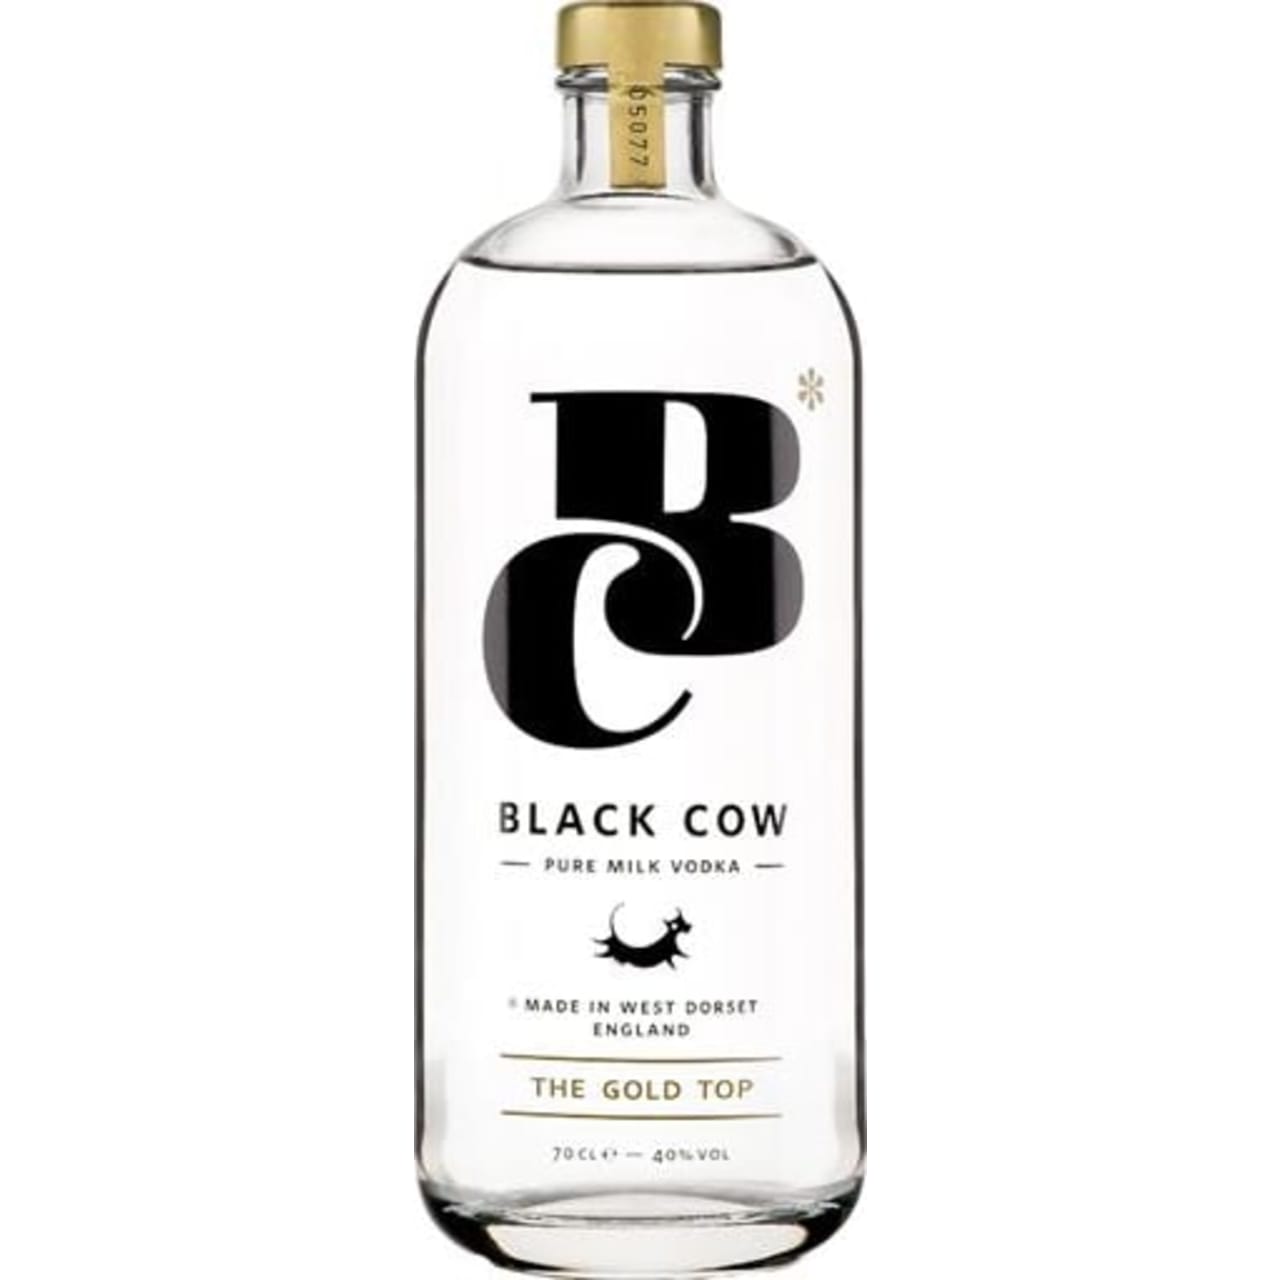 Fresh whole milk makes an exceptionally smooth vodka with a unique creamy character and texture.